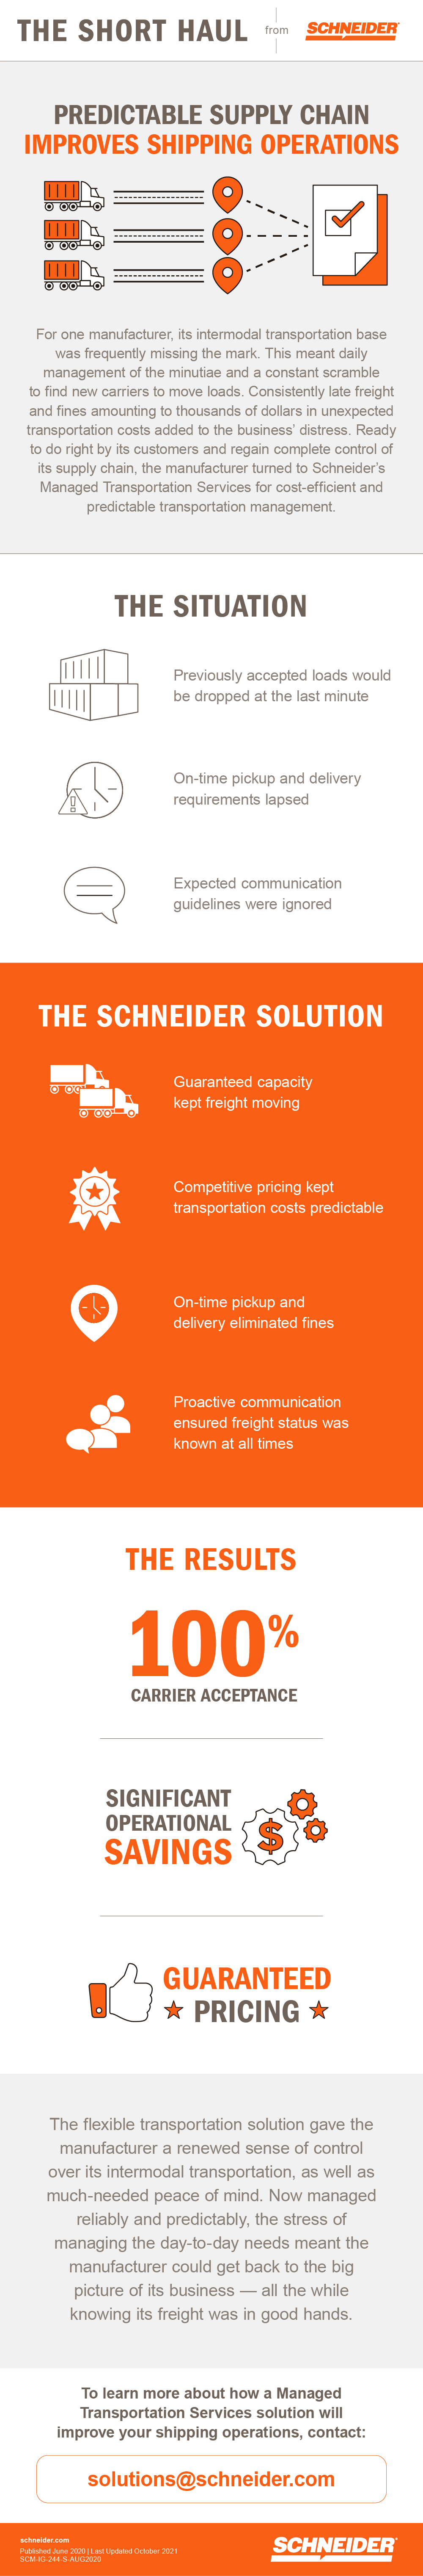 Predictable Supply Chain Improves Shipping Operations